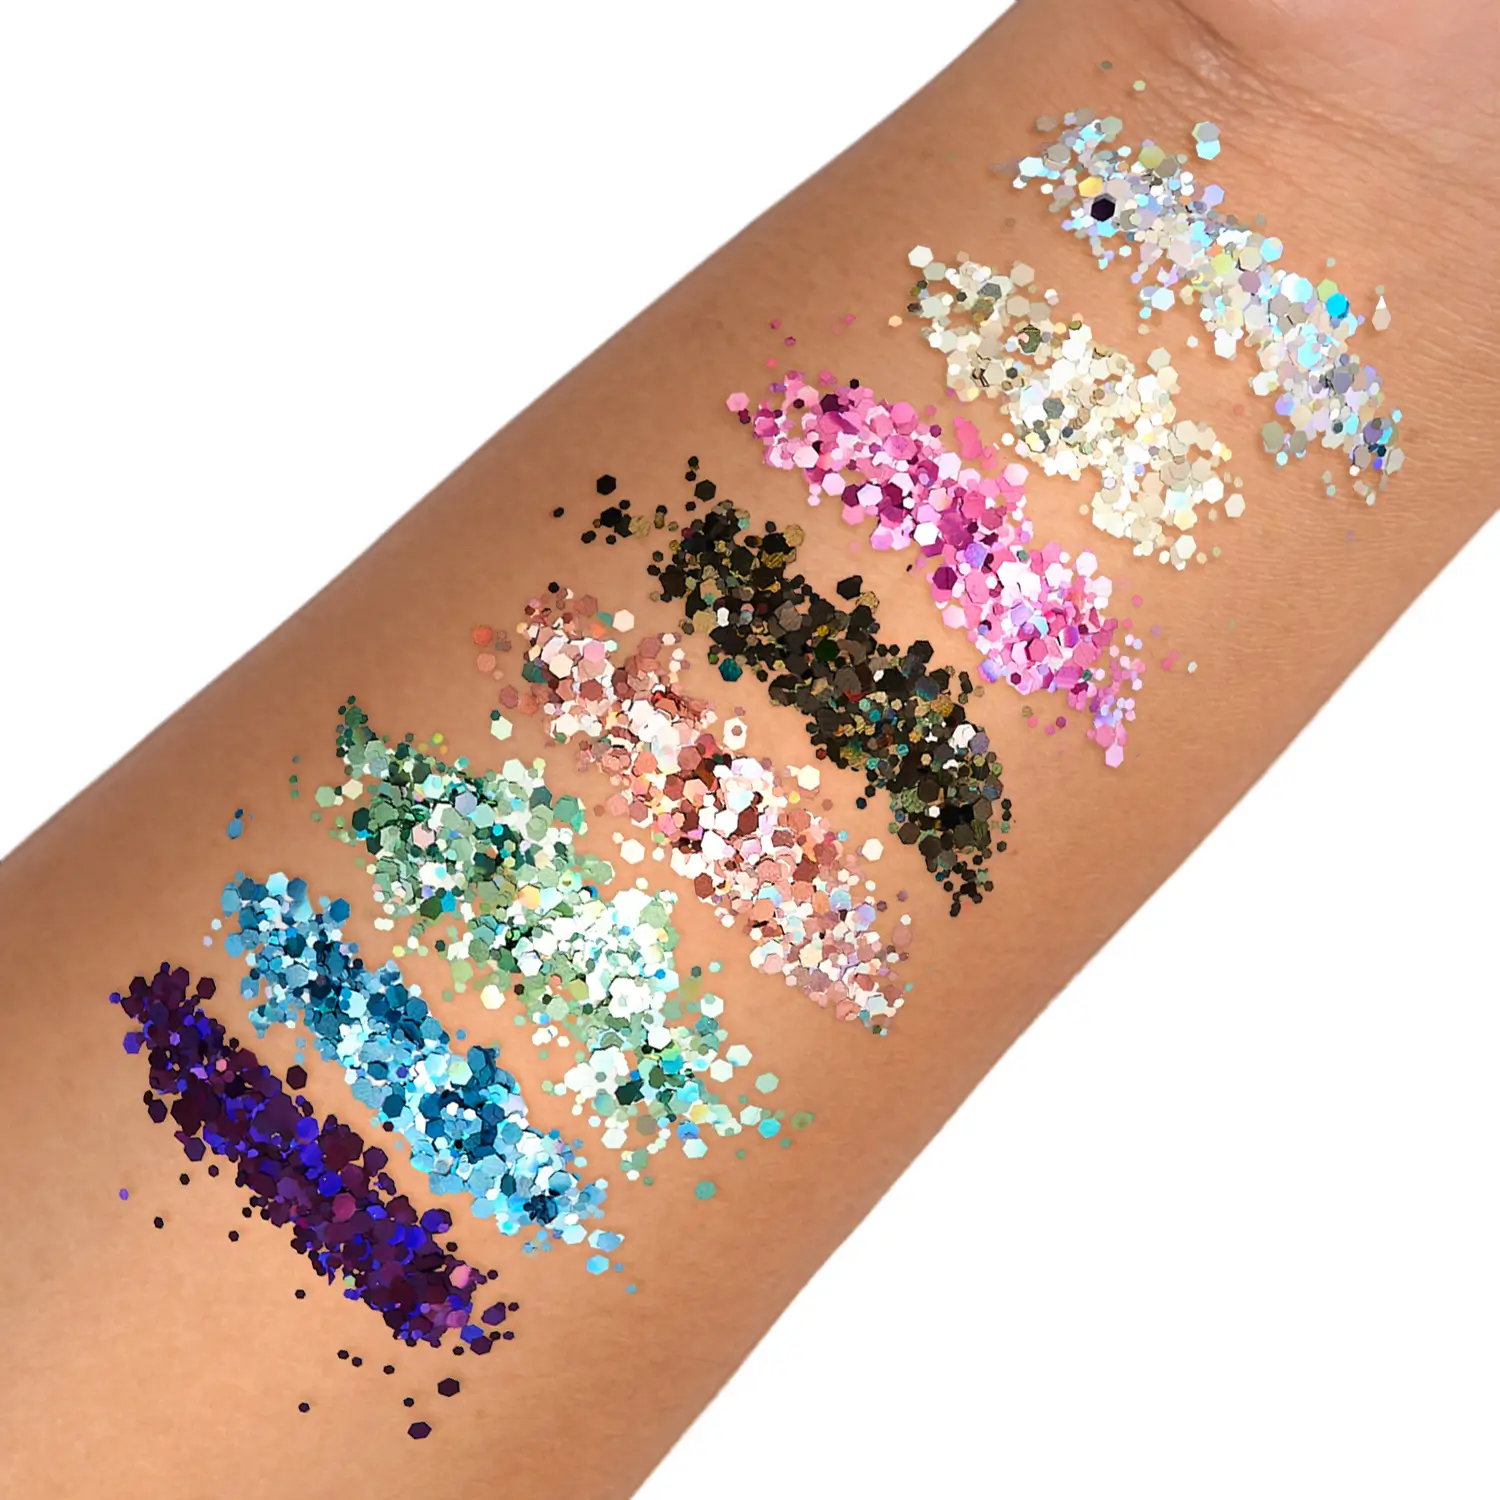 Holographic Chunky Glitter Pots Swatch by Glitter Me Up ™ | PaintGlow